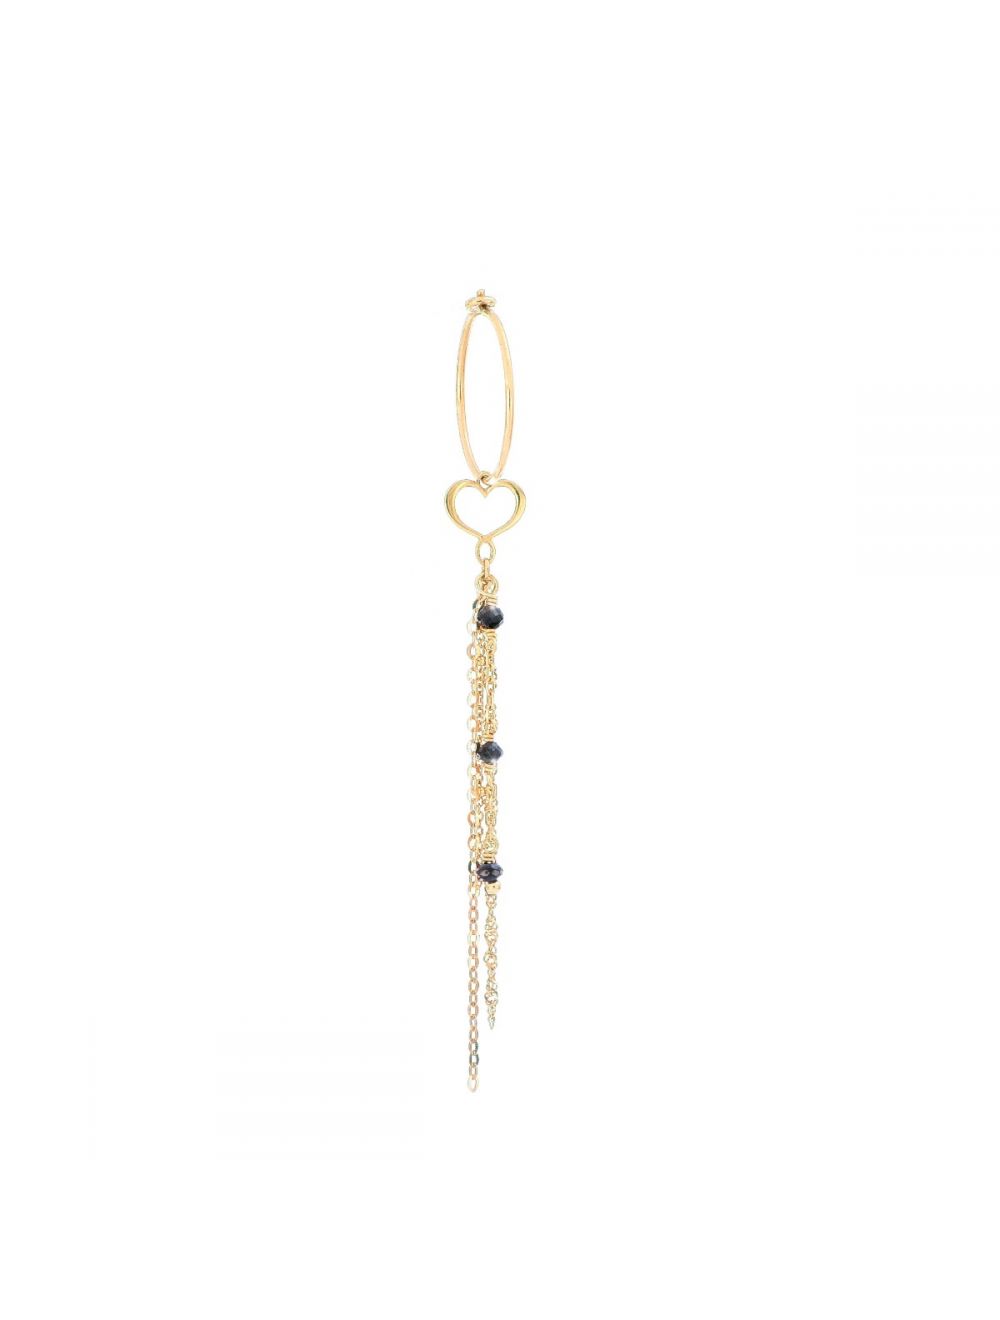 SINGLE EARRING WITH BLACK DIAMONDS, 18ct YELLOW GOLD AND MAMAN PETIT HEART - ORPDM9MS